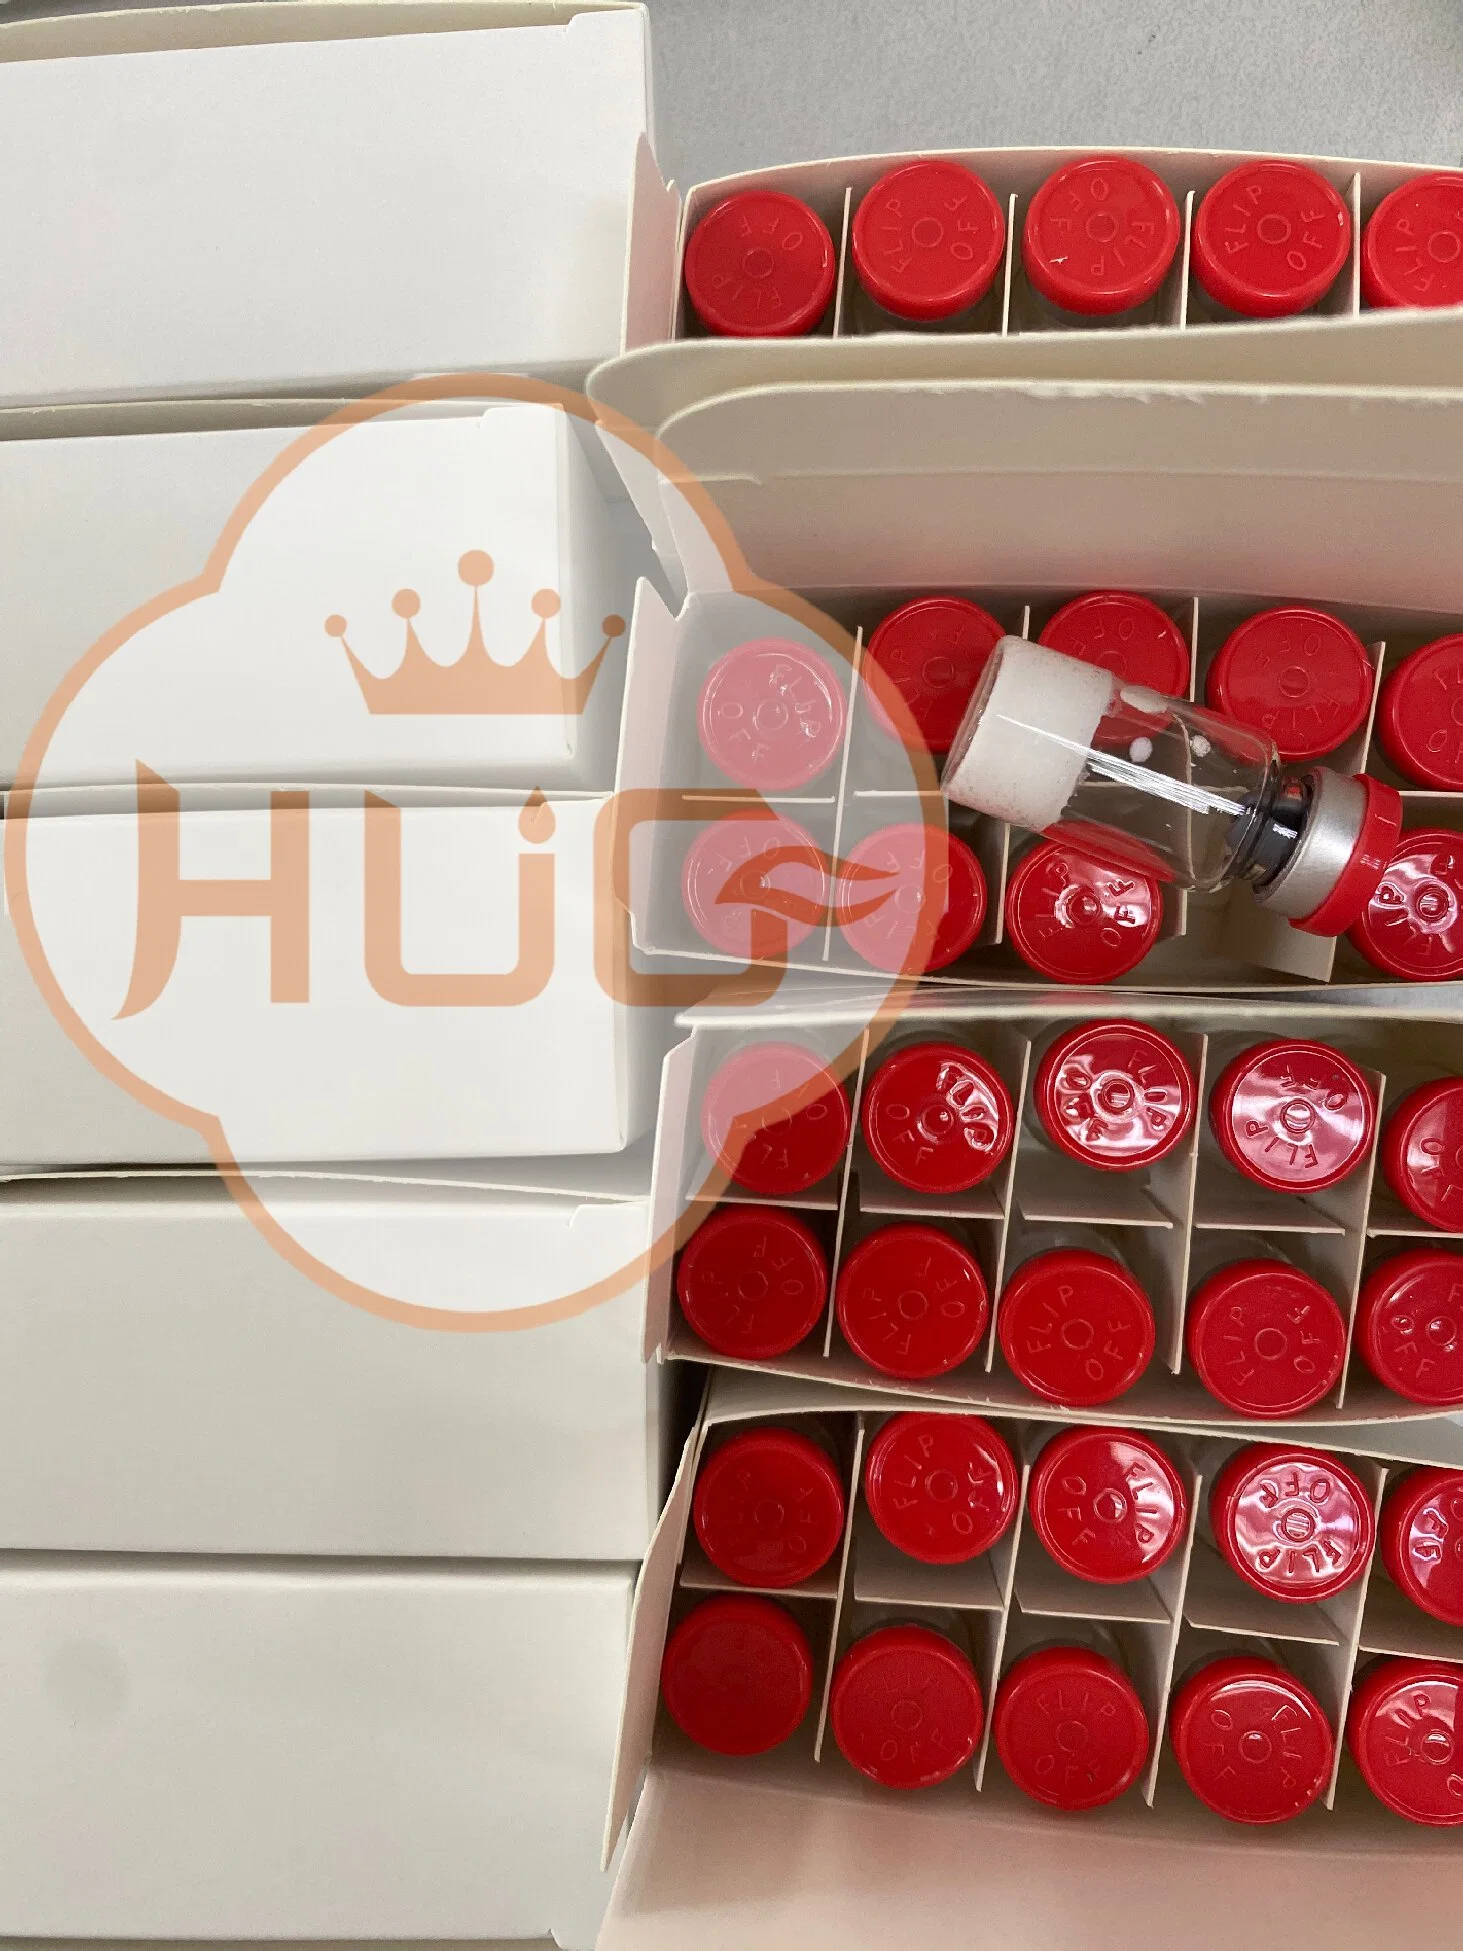 Tirzepatide Peptide 2mg 5mg 10mg Vials High Purity 99.9% Safe Fast Delivery Semaglutide Fat Loss